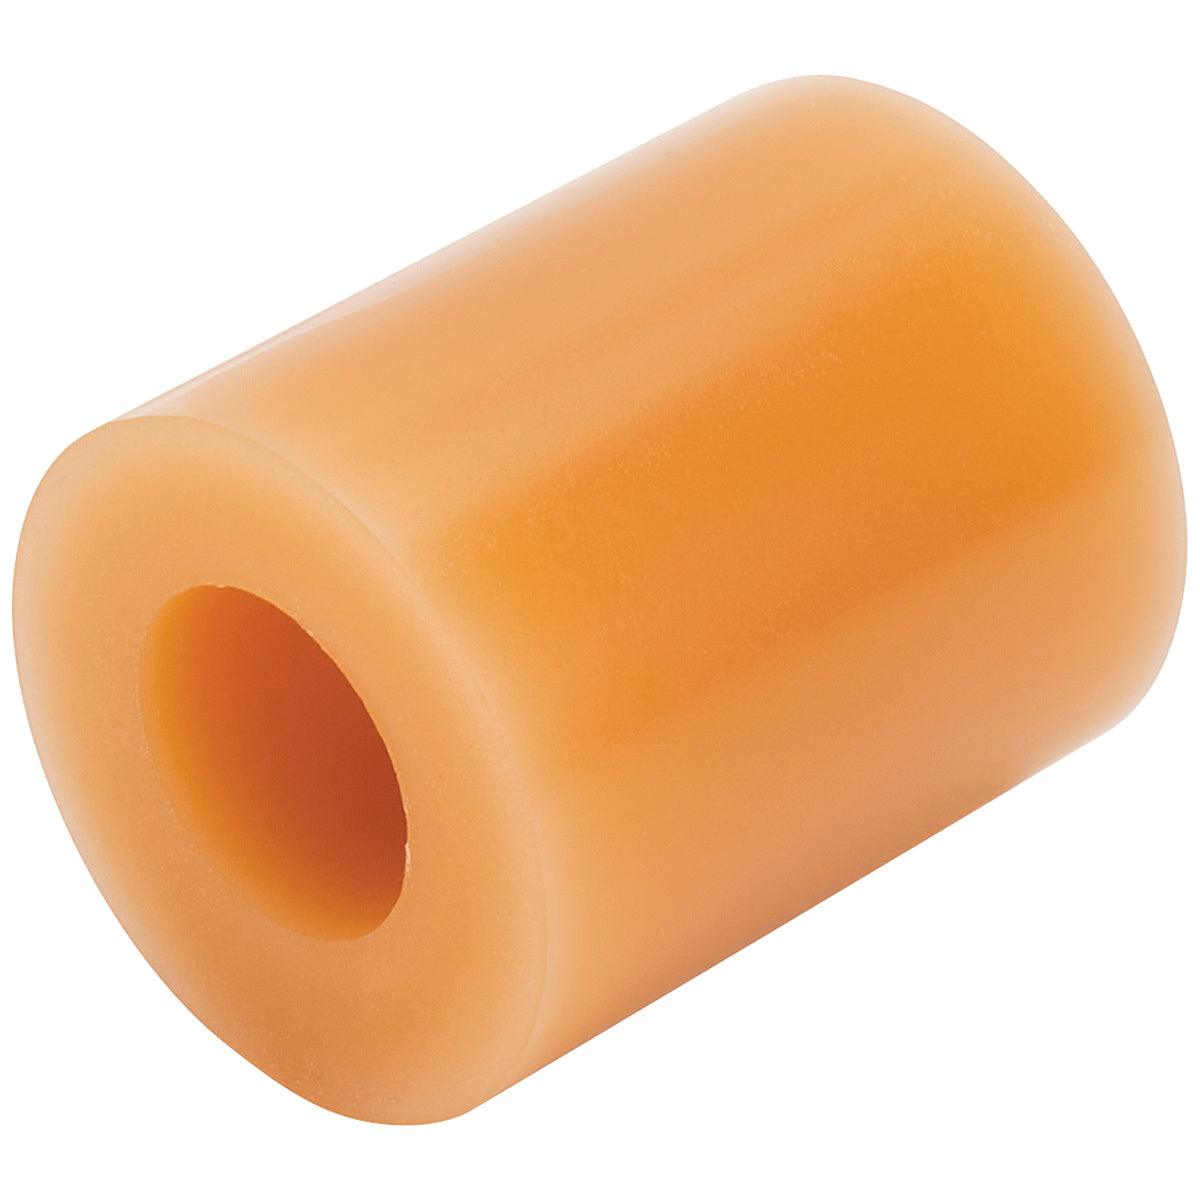 Bushing Insert for ALL56248 60DR Med - Burlile Performance Products